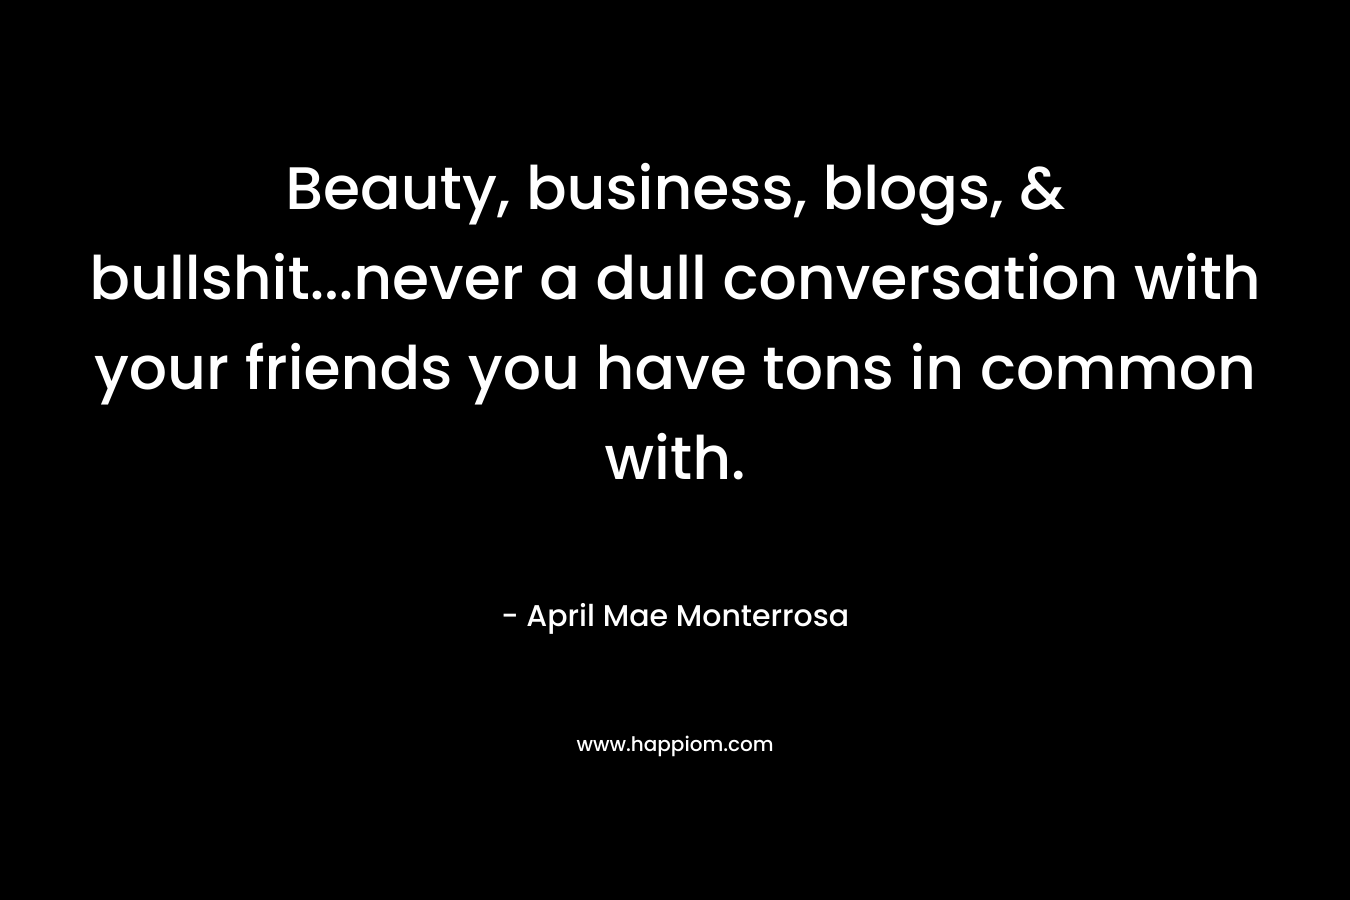 Beauty, business, blogs, & bullshit…never a dull conversation with your friends you have tons in common with. – April Mae Monterrosa